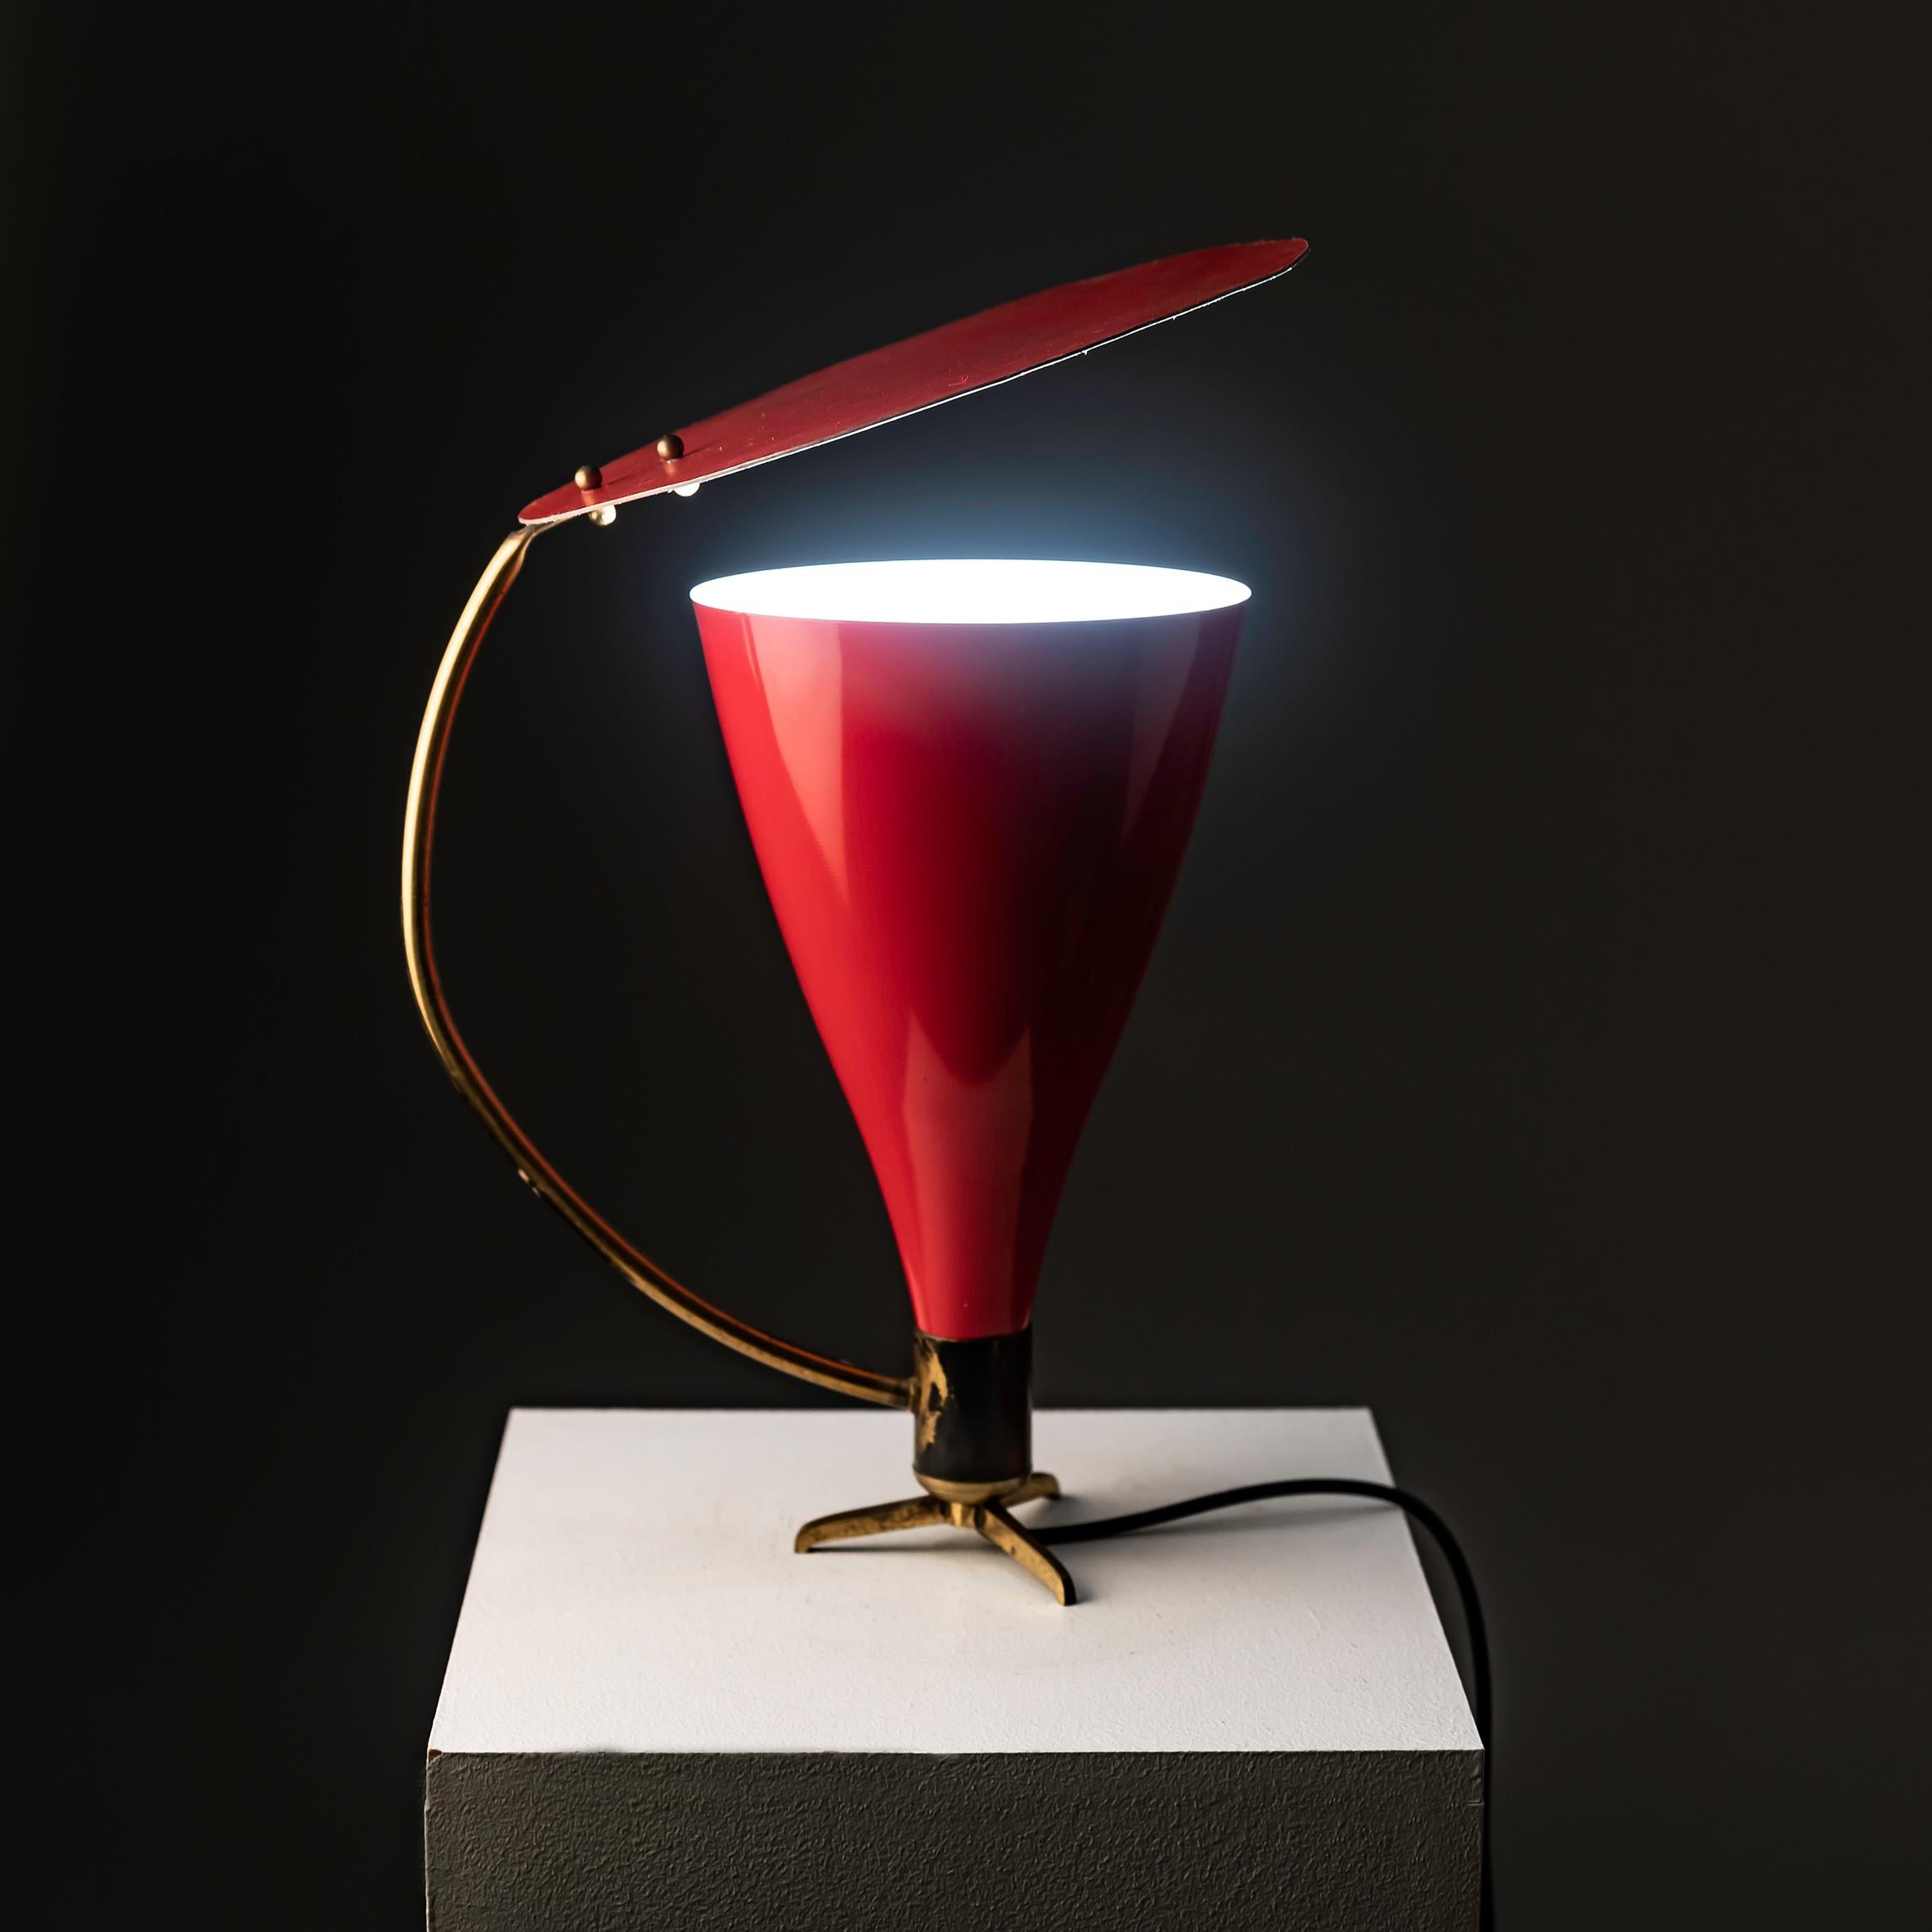 Investing in this very rare 1950s Italian table lamp in the style of Stilnovo presents a remarkable opportunity to acquire a piece of design history that exudes elegance and sophistication. Stilnovo's influence on mid-century design is unmistakable,